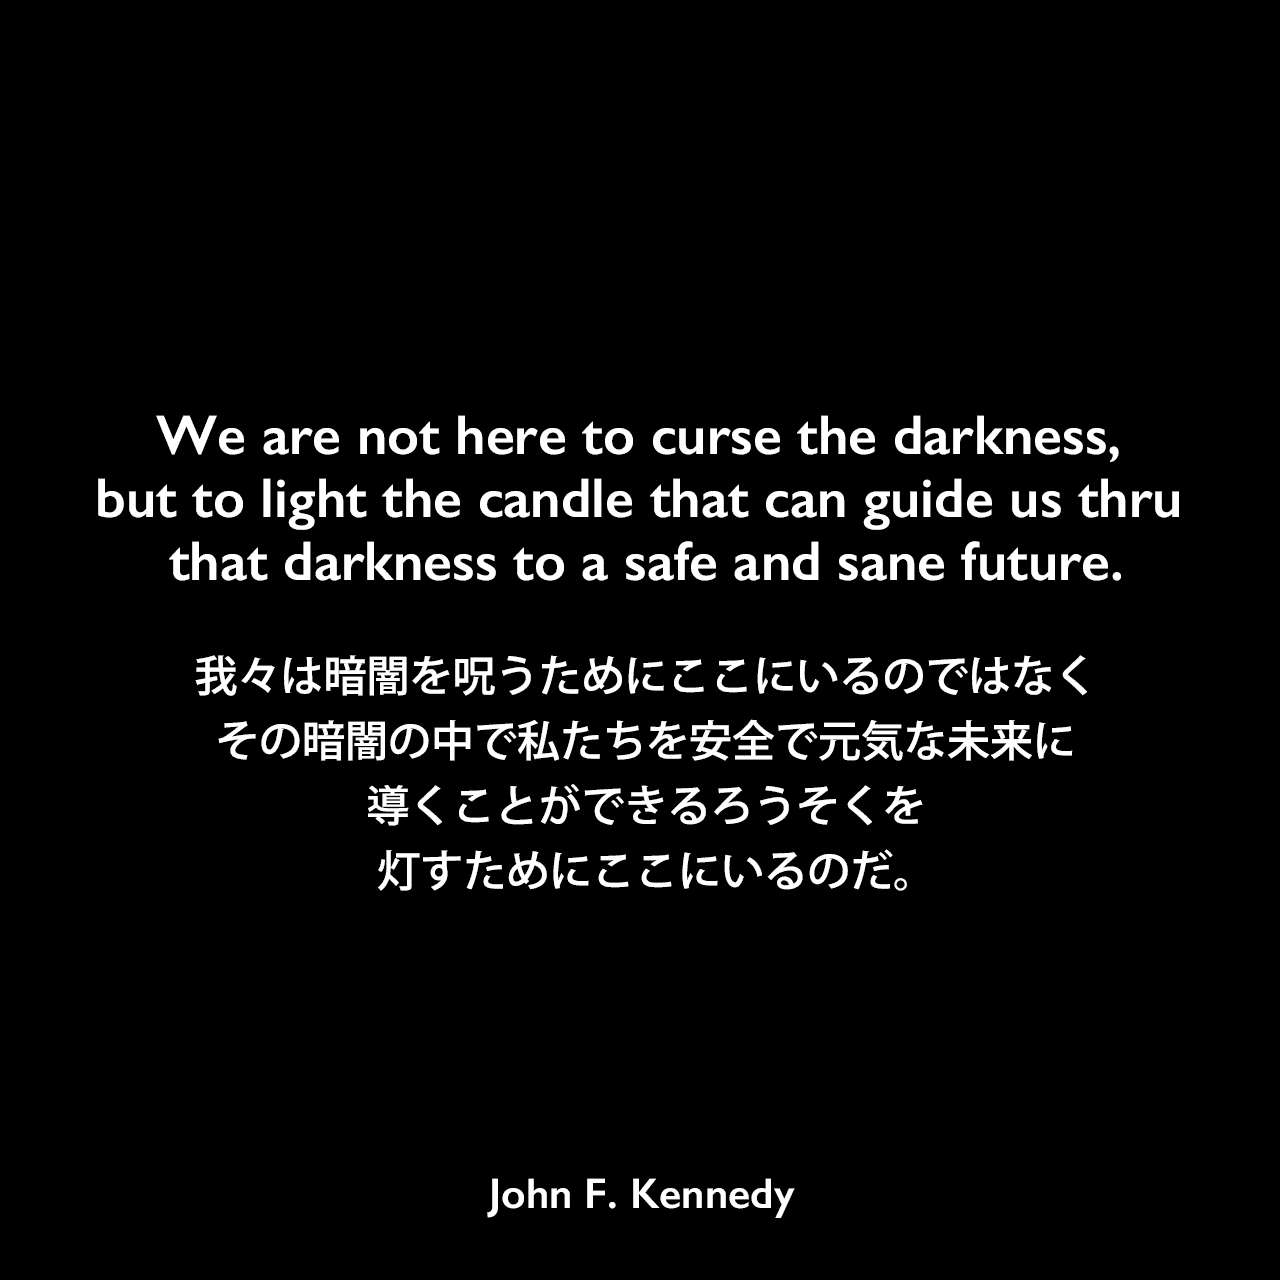 We are not here to curse the darkness, but to light the candle that can guide us thru that darkness to a safe and sane future.我々は暗闇を呪うためにここにいるのではなく、その暗闇の中で私たちを安全で元気な未来に導くことができるろうそくを灯すためにここにいるのだ。- 1960年の民主党大会での「The New Frontier」スピーチより